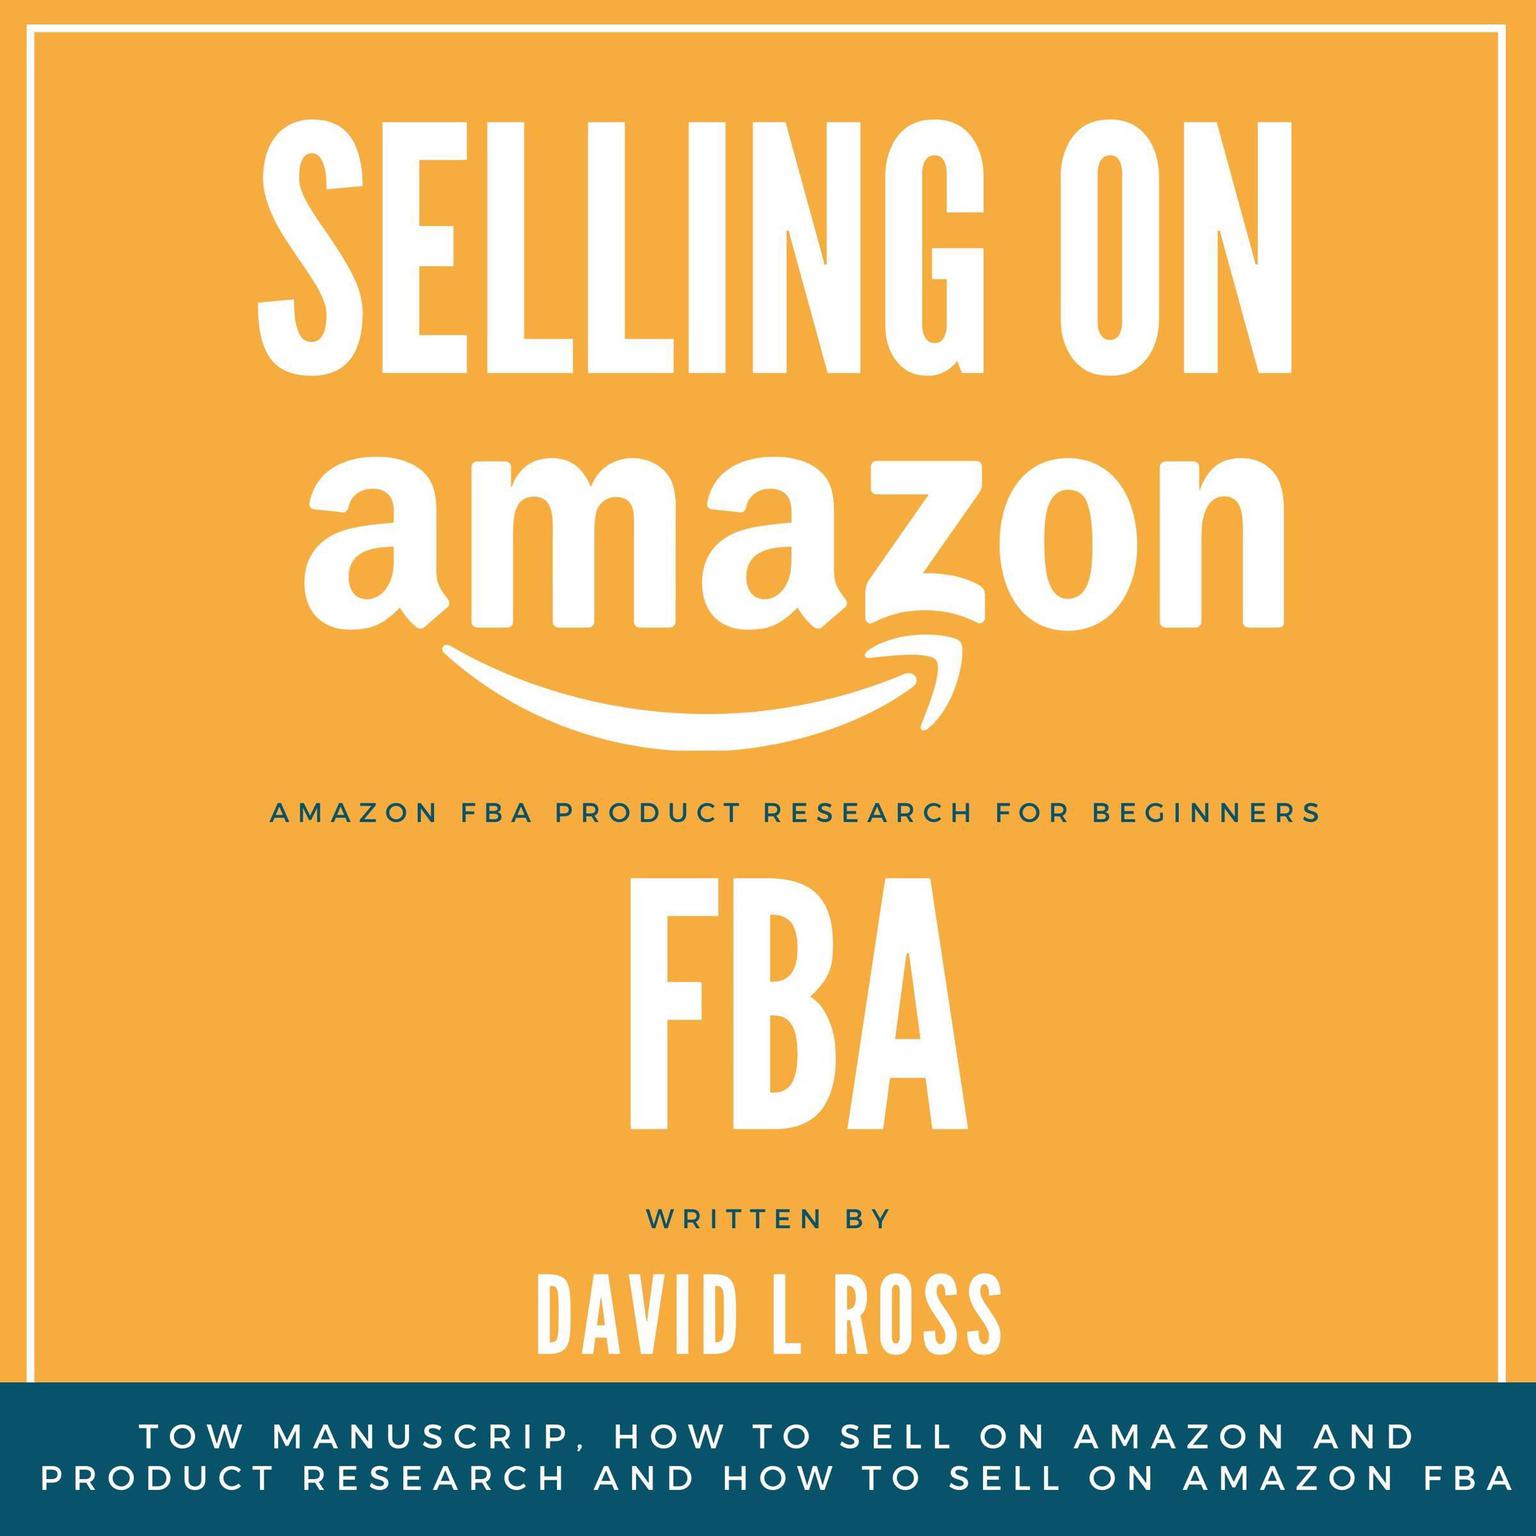 Selling on Amazon Fba: Tow Manuscript, How to Sell on Amazon and Product Research and How to Sell on Amazon FBA Audiobook, by David L Ross